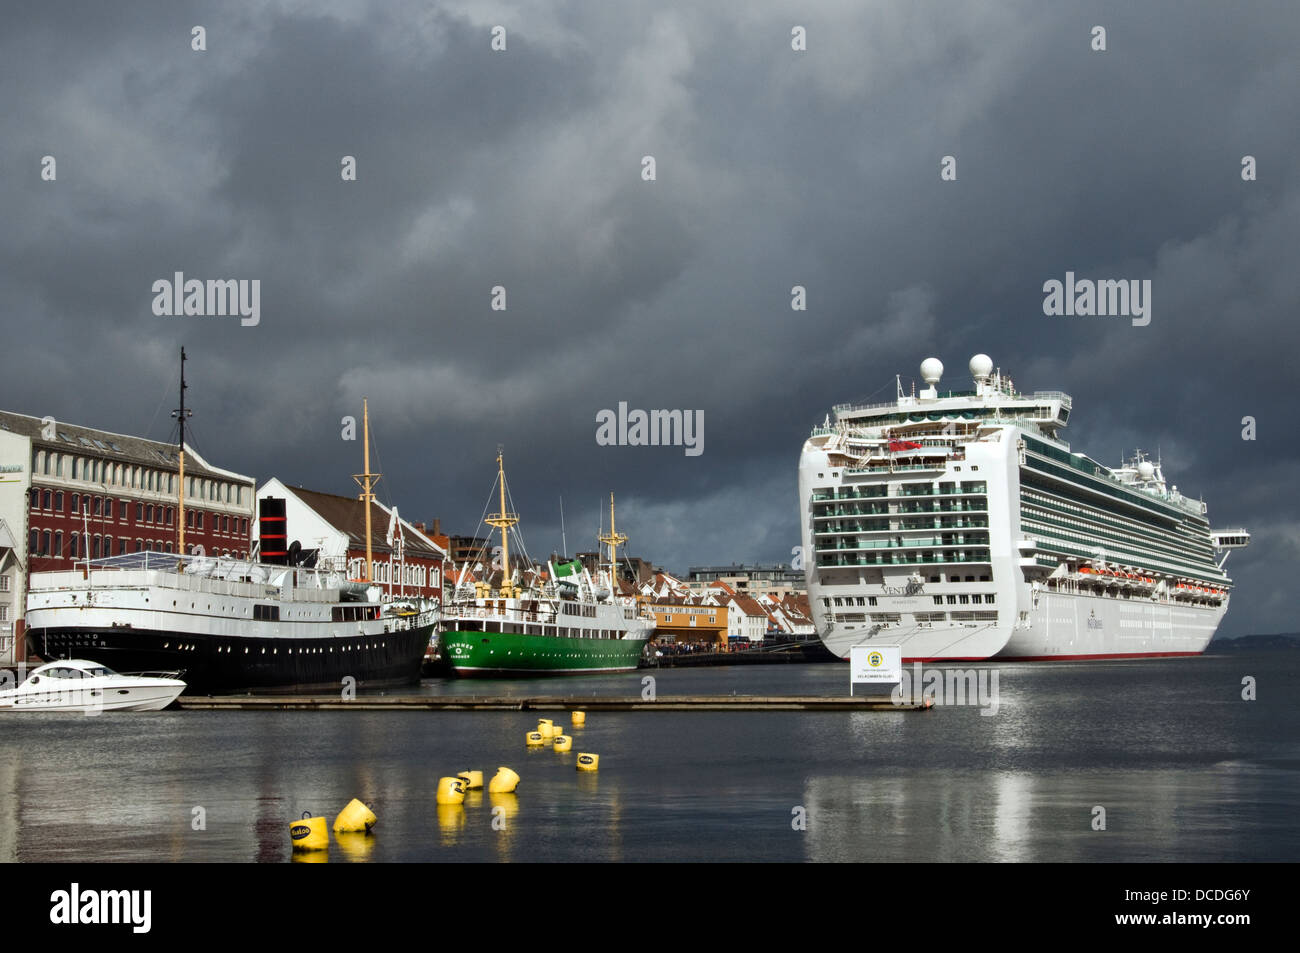 p and o ship docked up in Stavanger Norway riding the weather Stock Photo